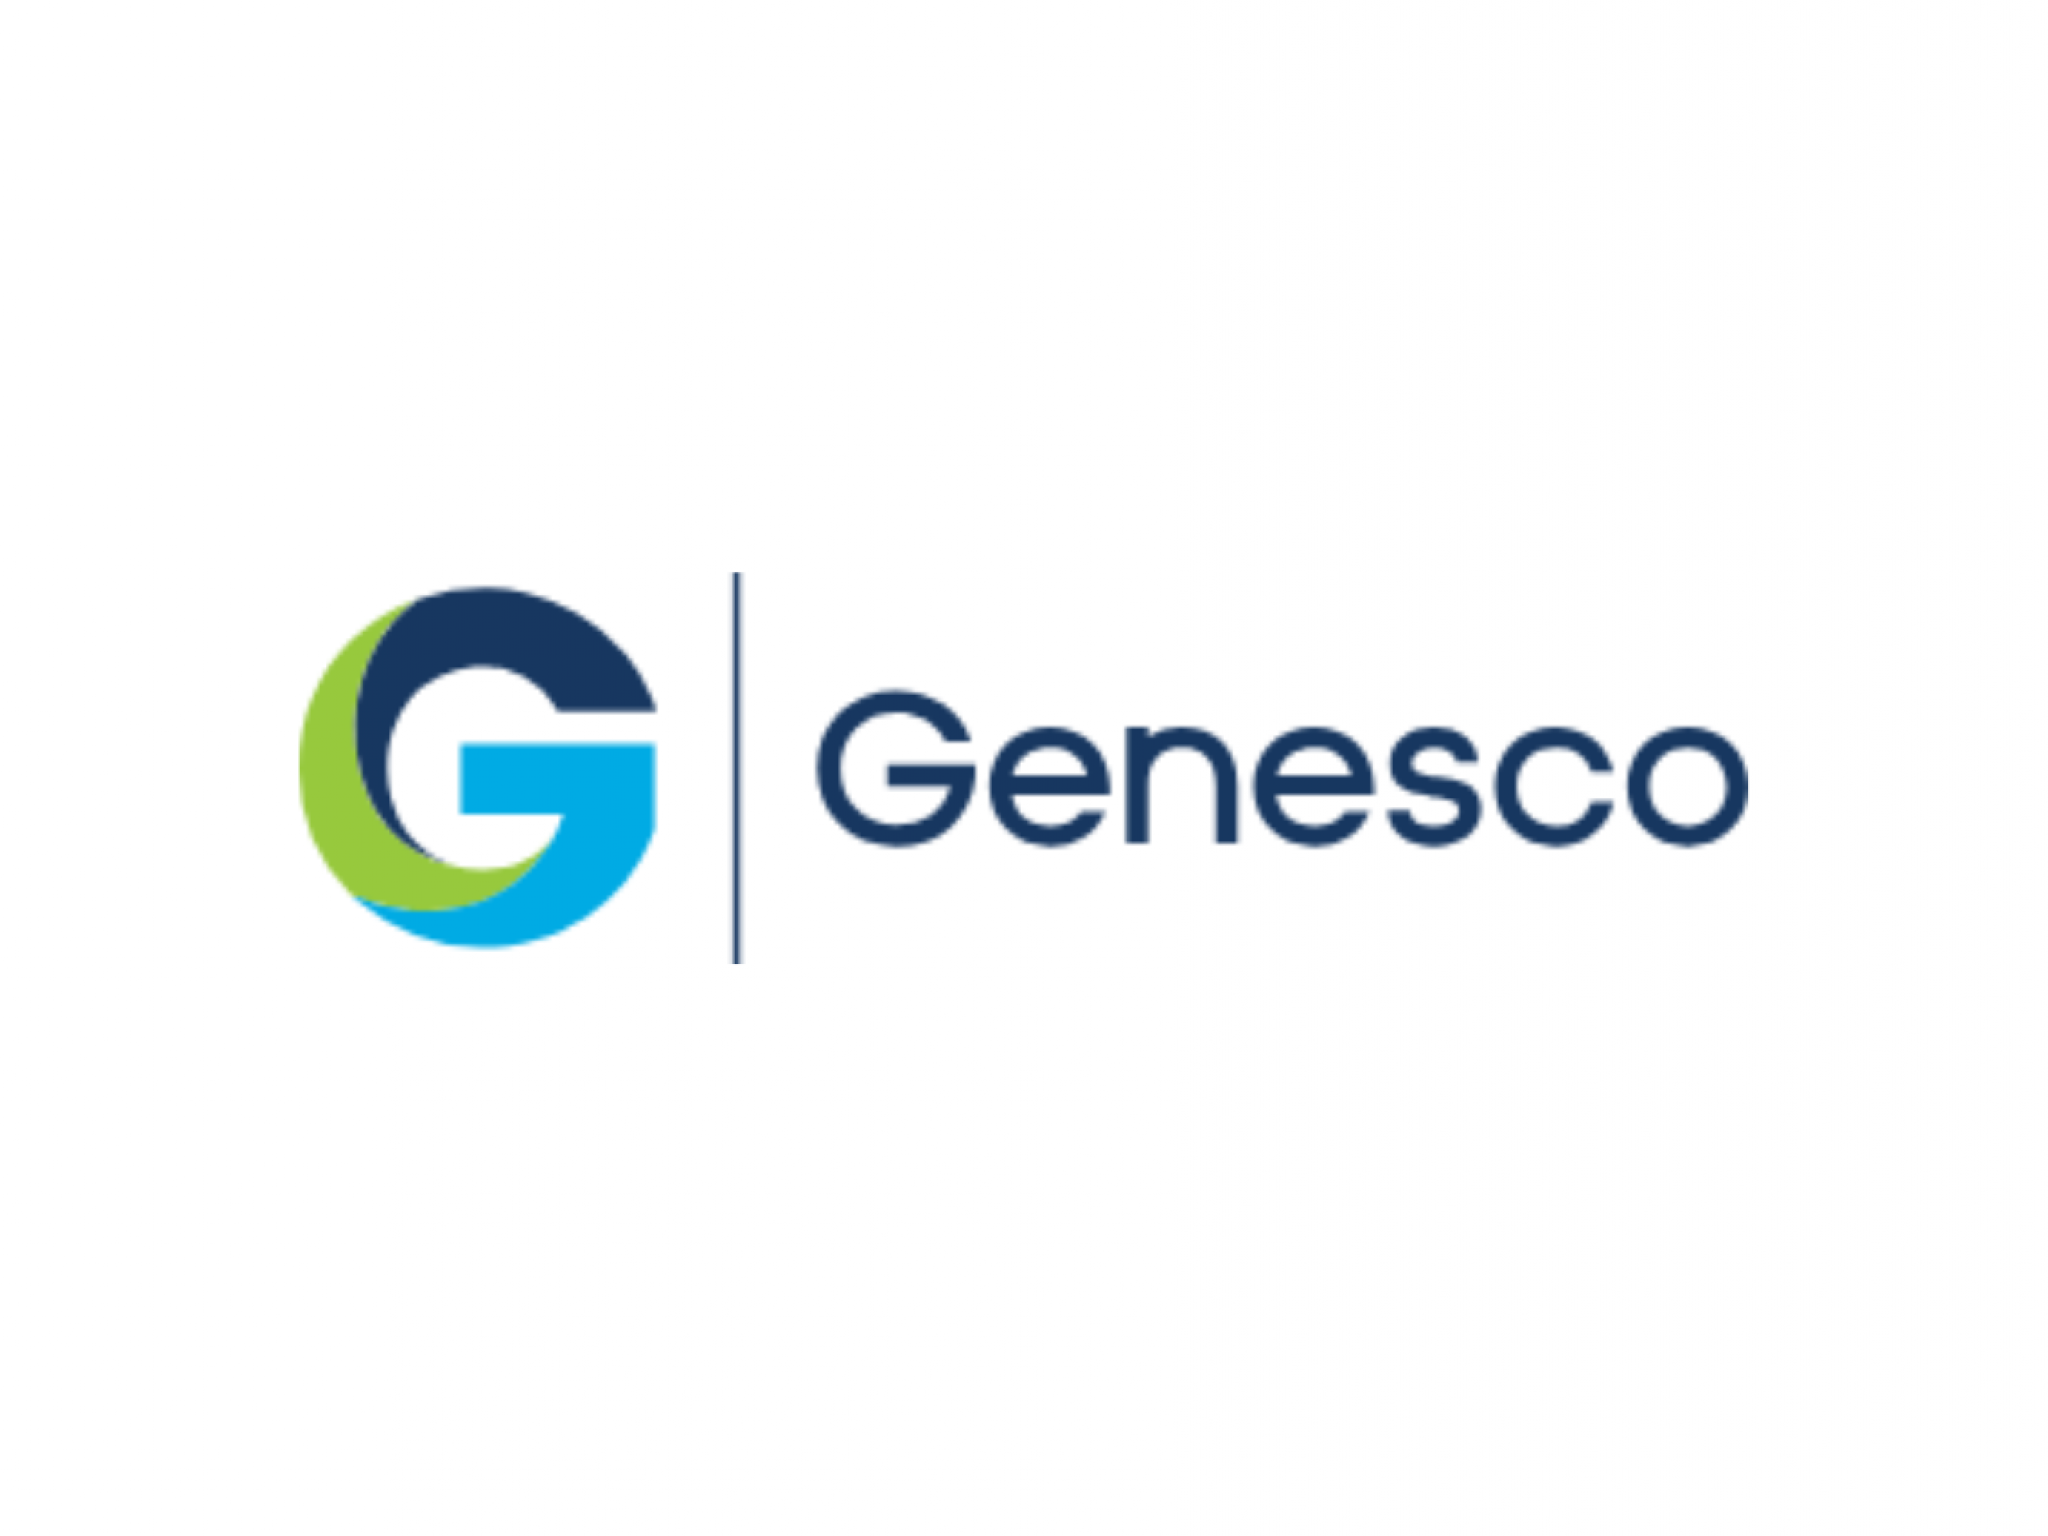  why-specialty-retailer-genesco-shares-are-tumbling-today 